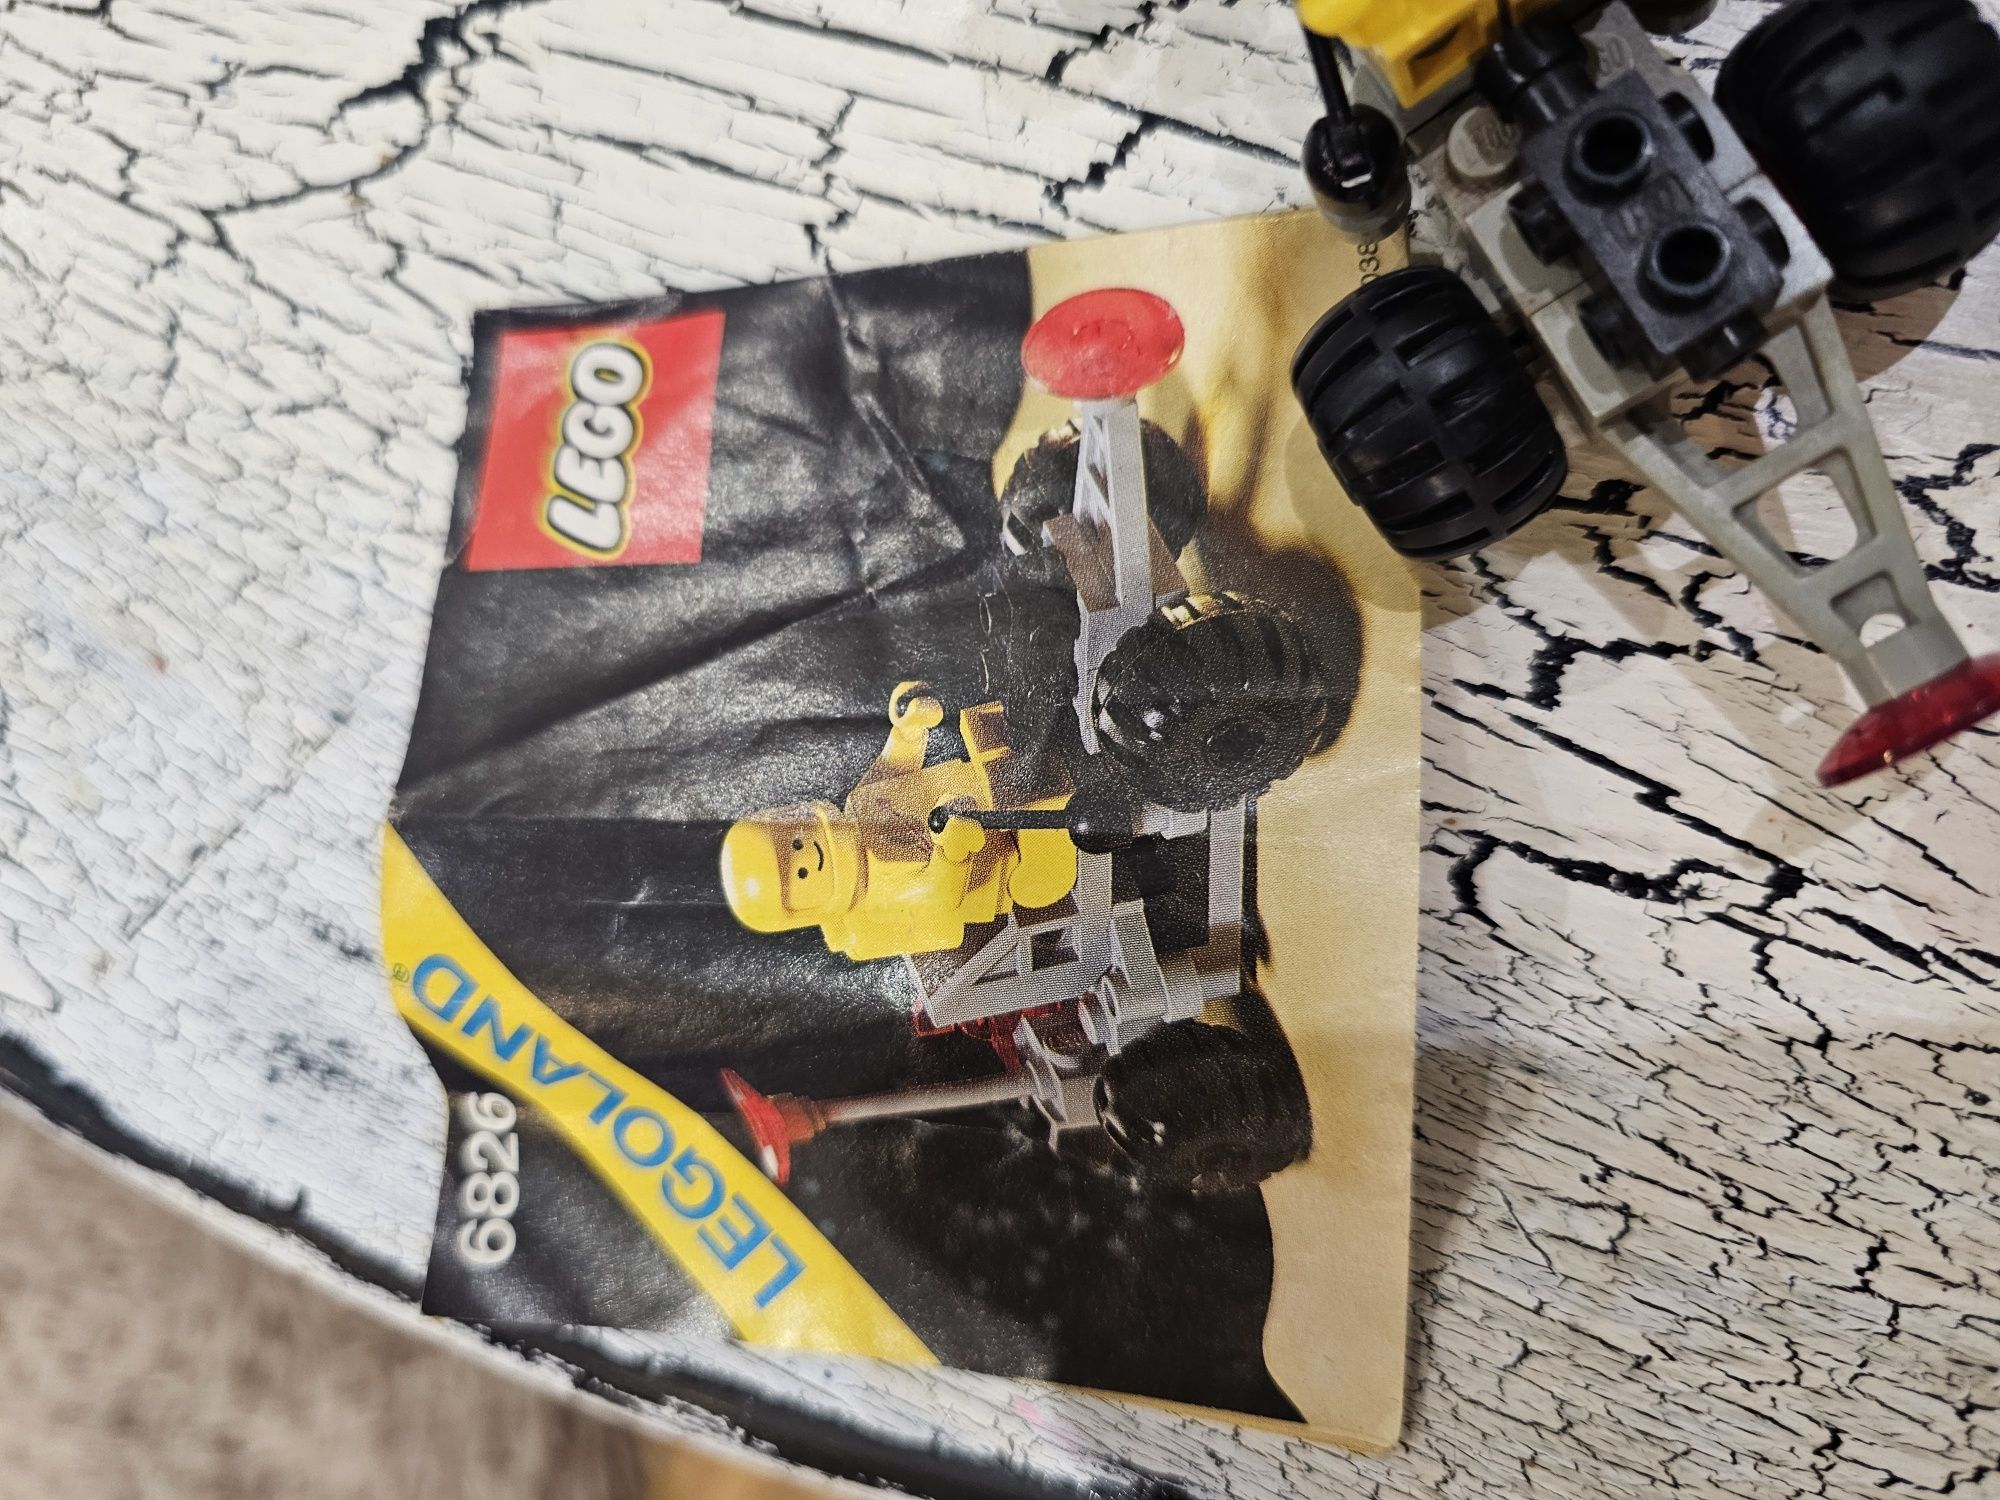 Lego 6826 space cater clawler